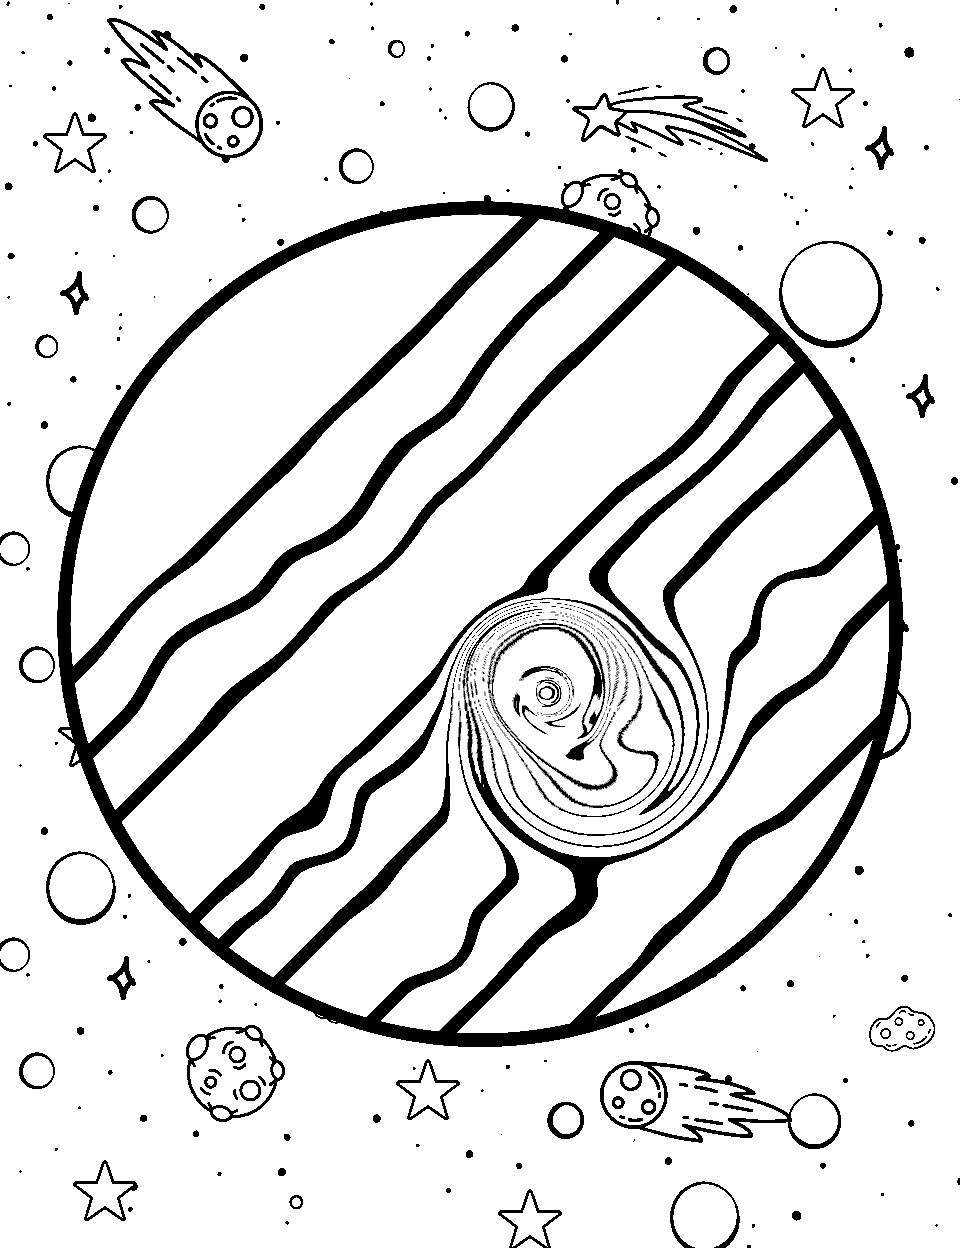 Jupiter's Giant Storm Coloring Page - The massive storm of Jupiter, also known as the Great Red Spot.